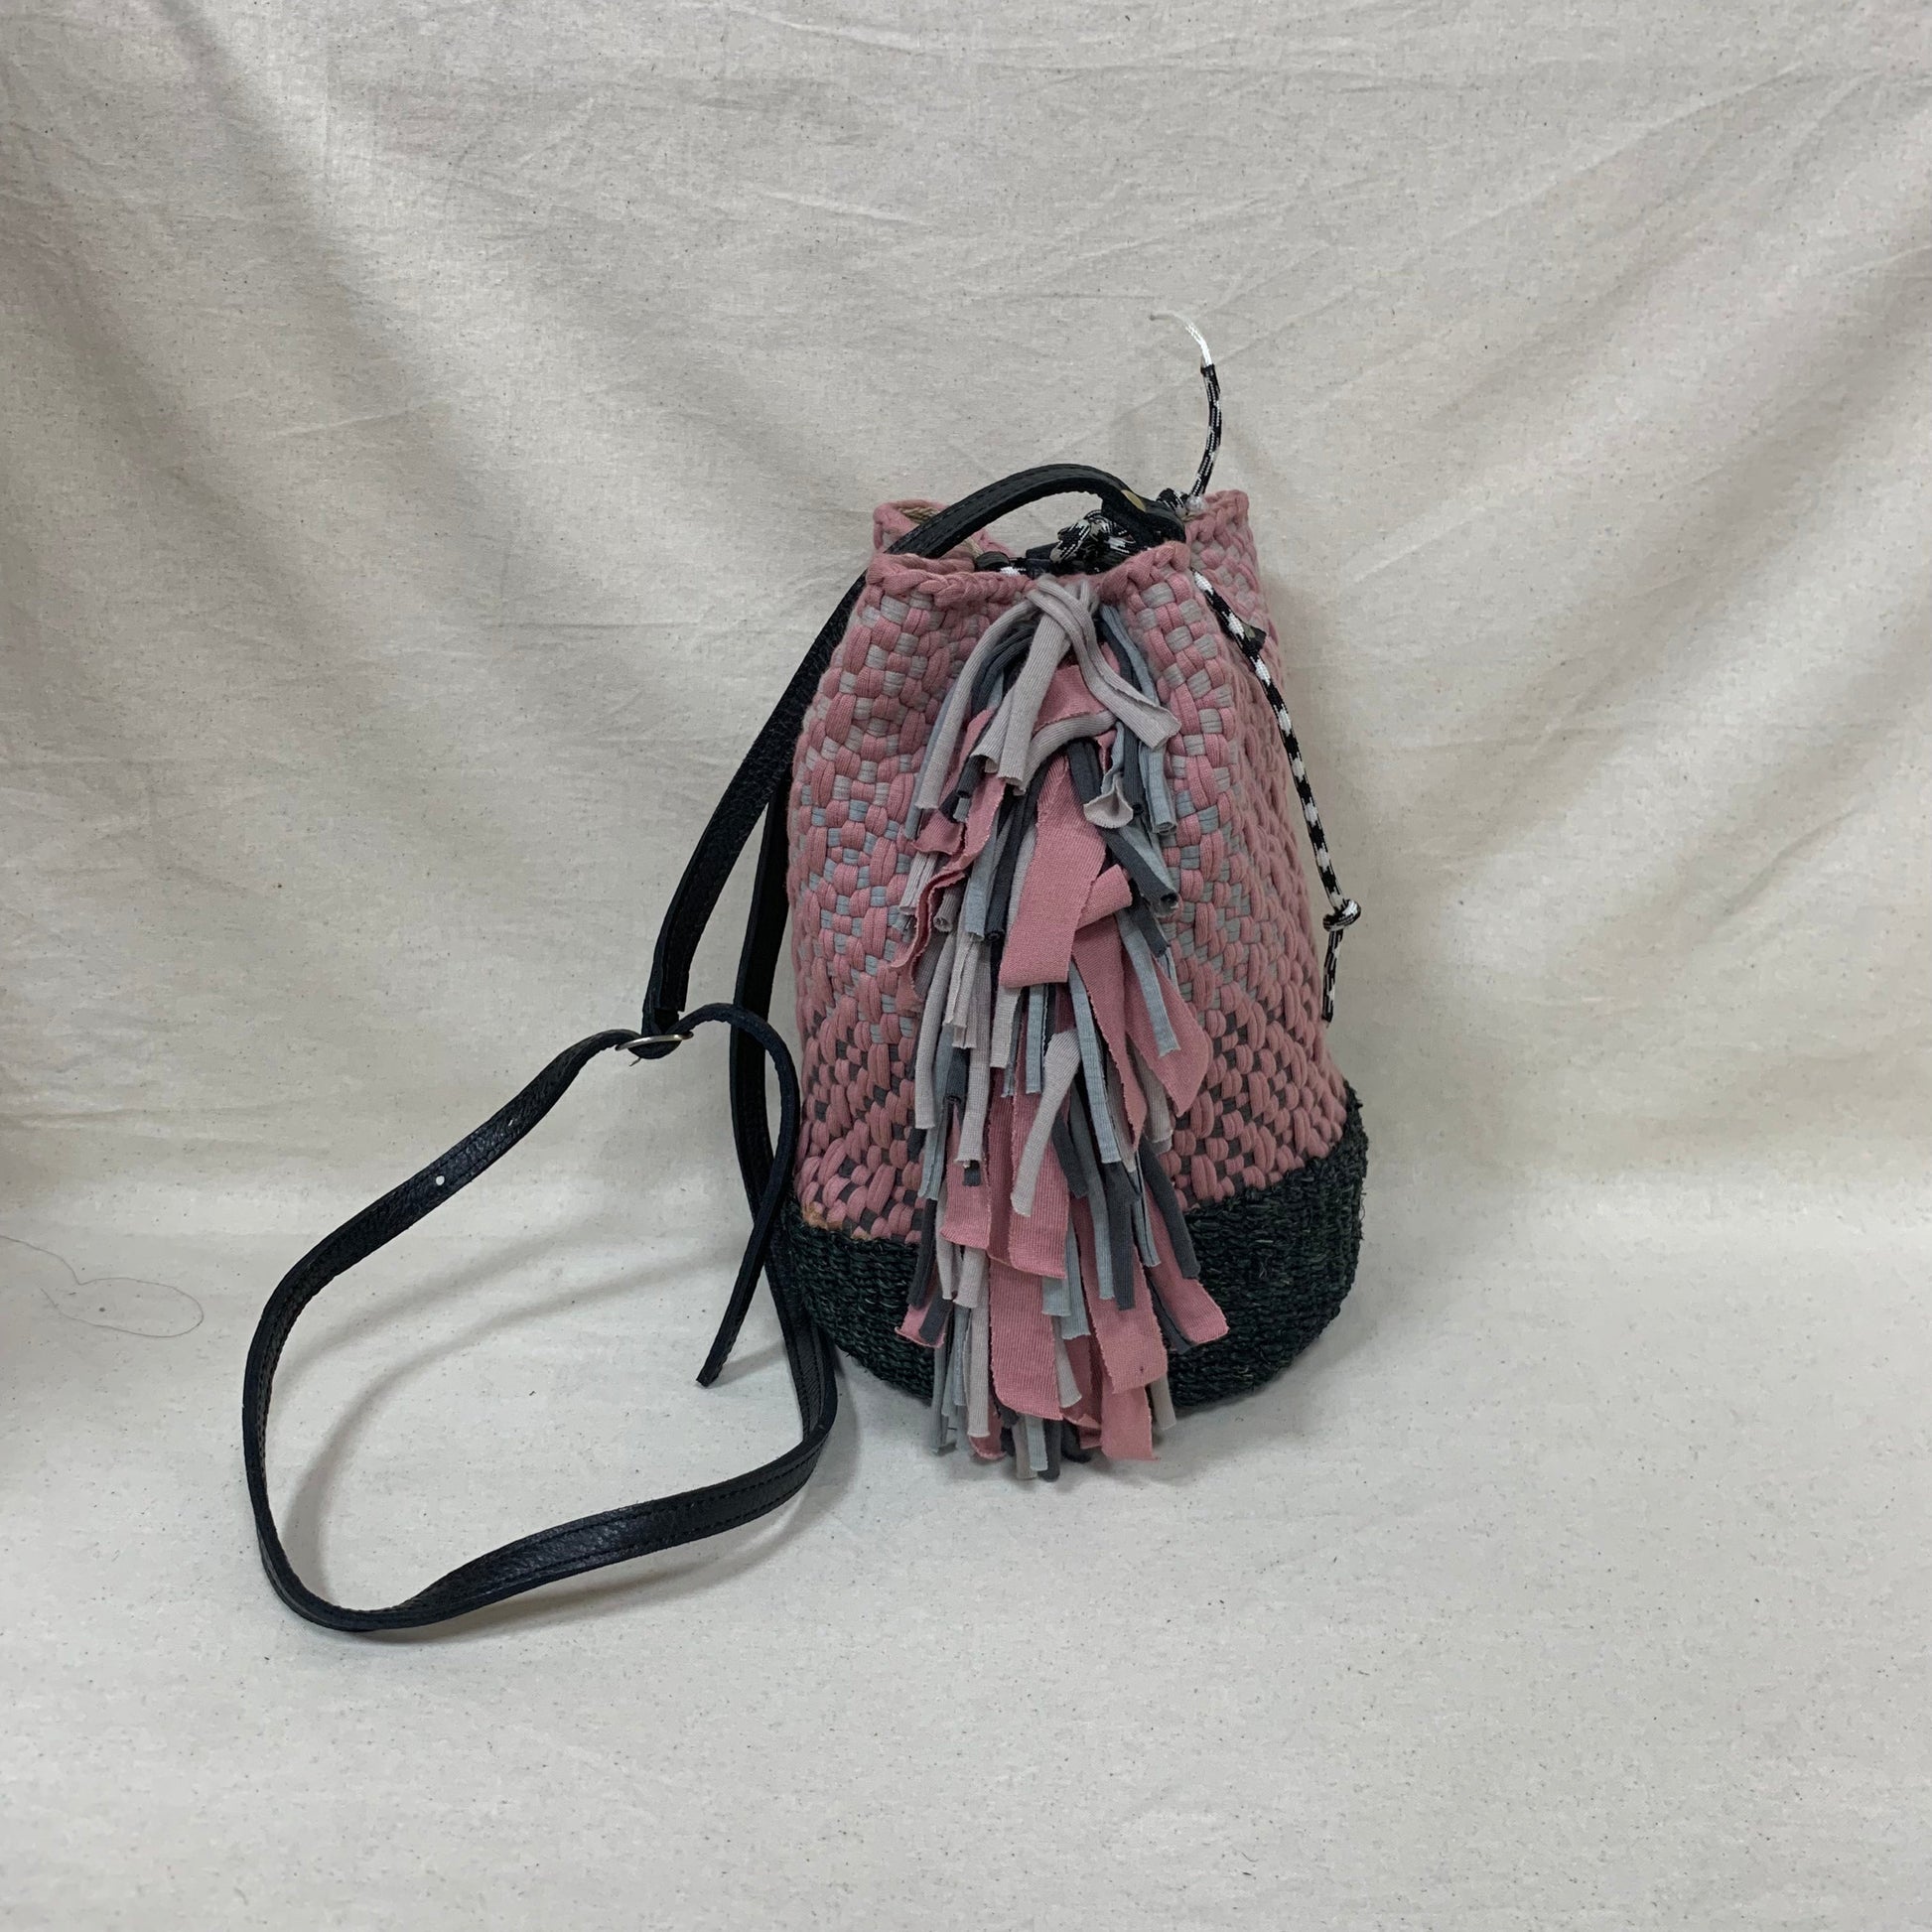 [SAMPLE] Woven Bucket Bag Purposeful Pink Fashion Rags2Riches